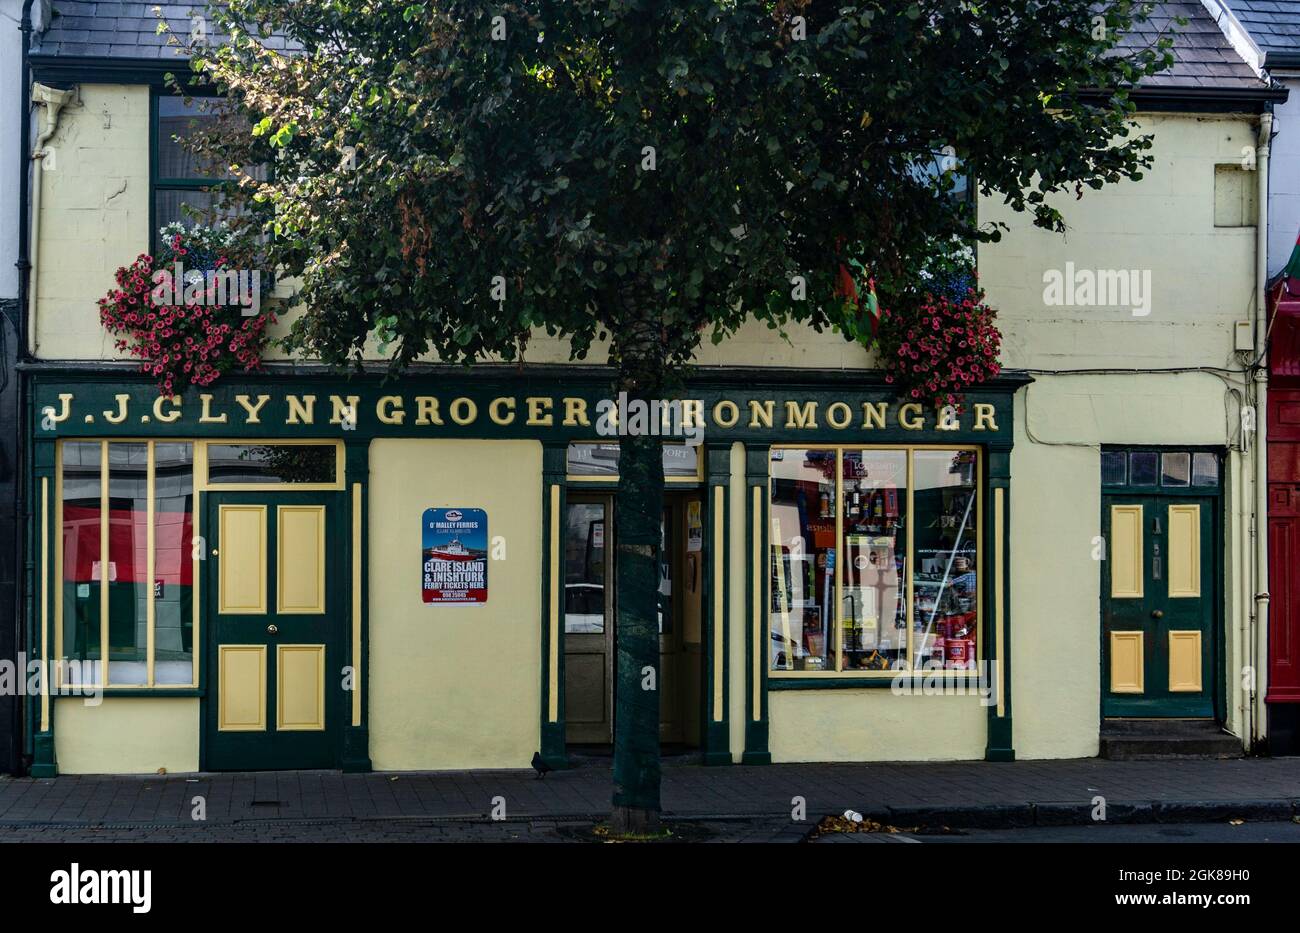 J. J. Glynn, grocer and ironmonger. A hardware and DIY store in Westport, County Mayo, Ireland. The building itself dates to 1838. Stock Photo